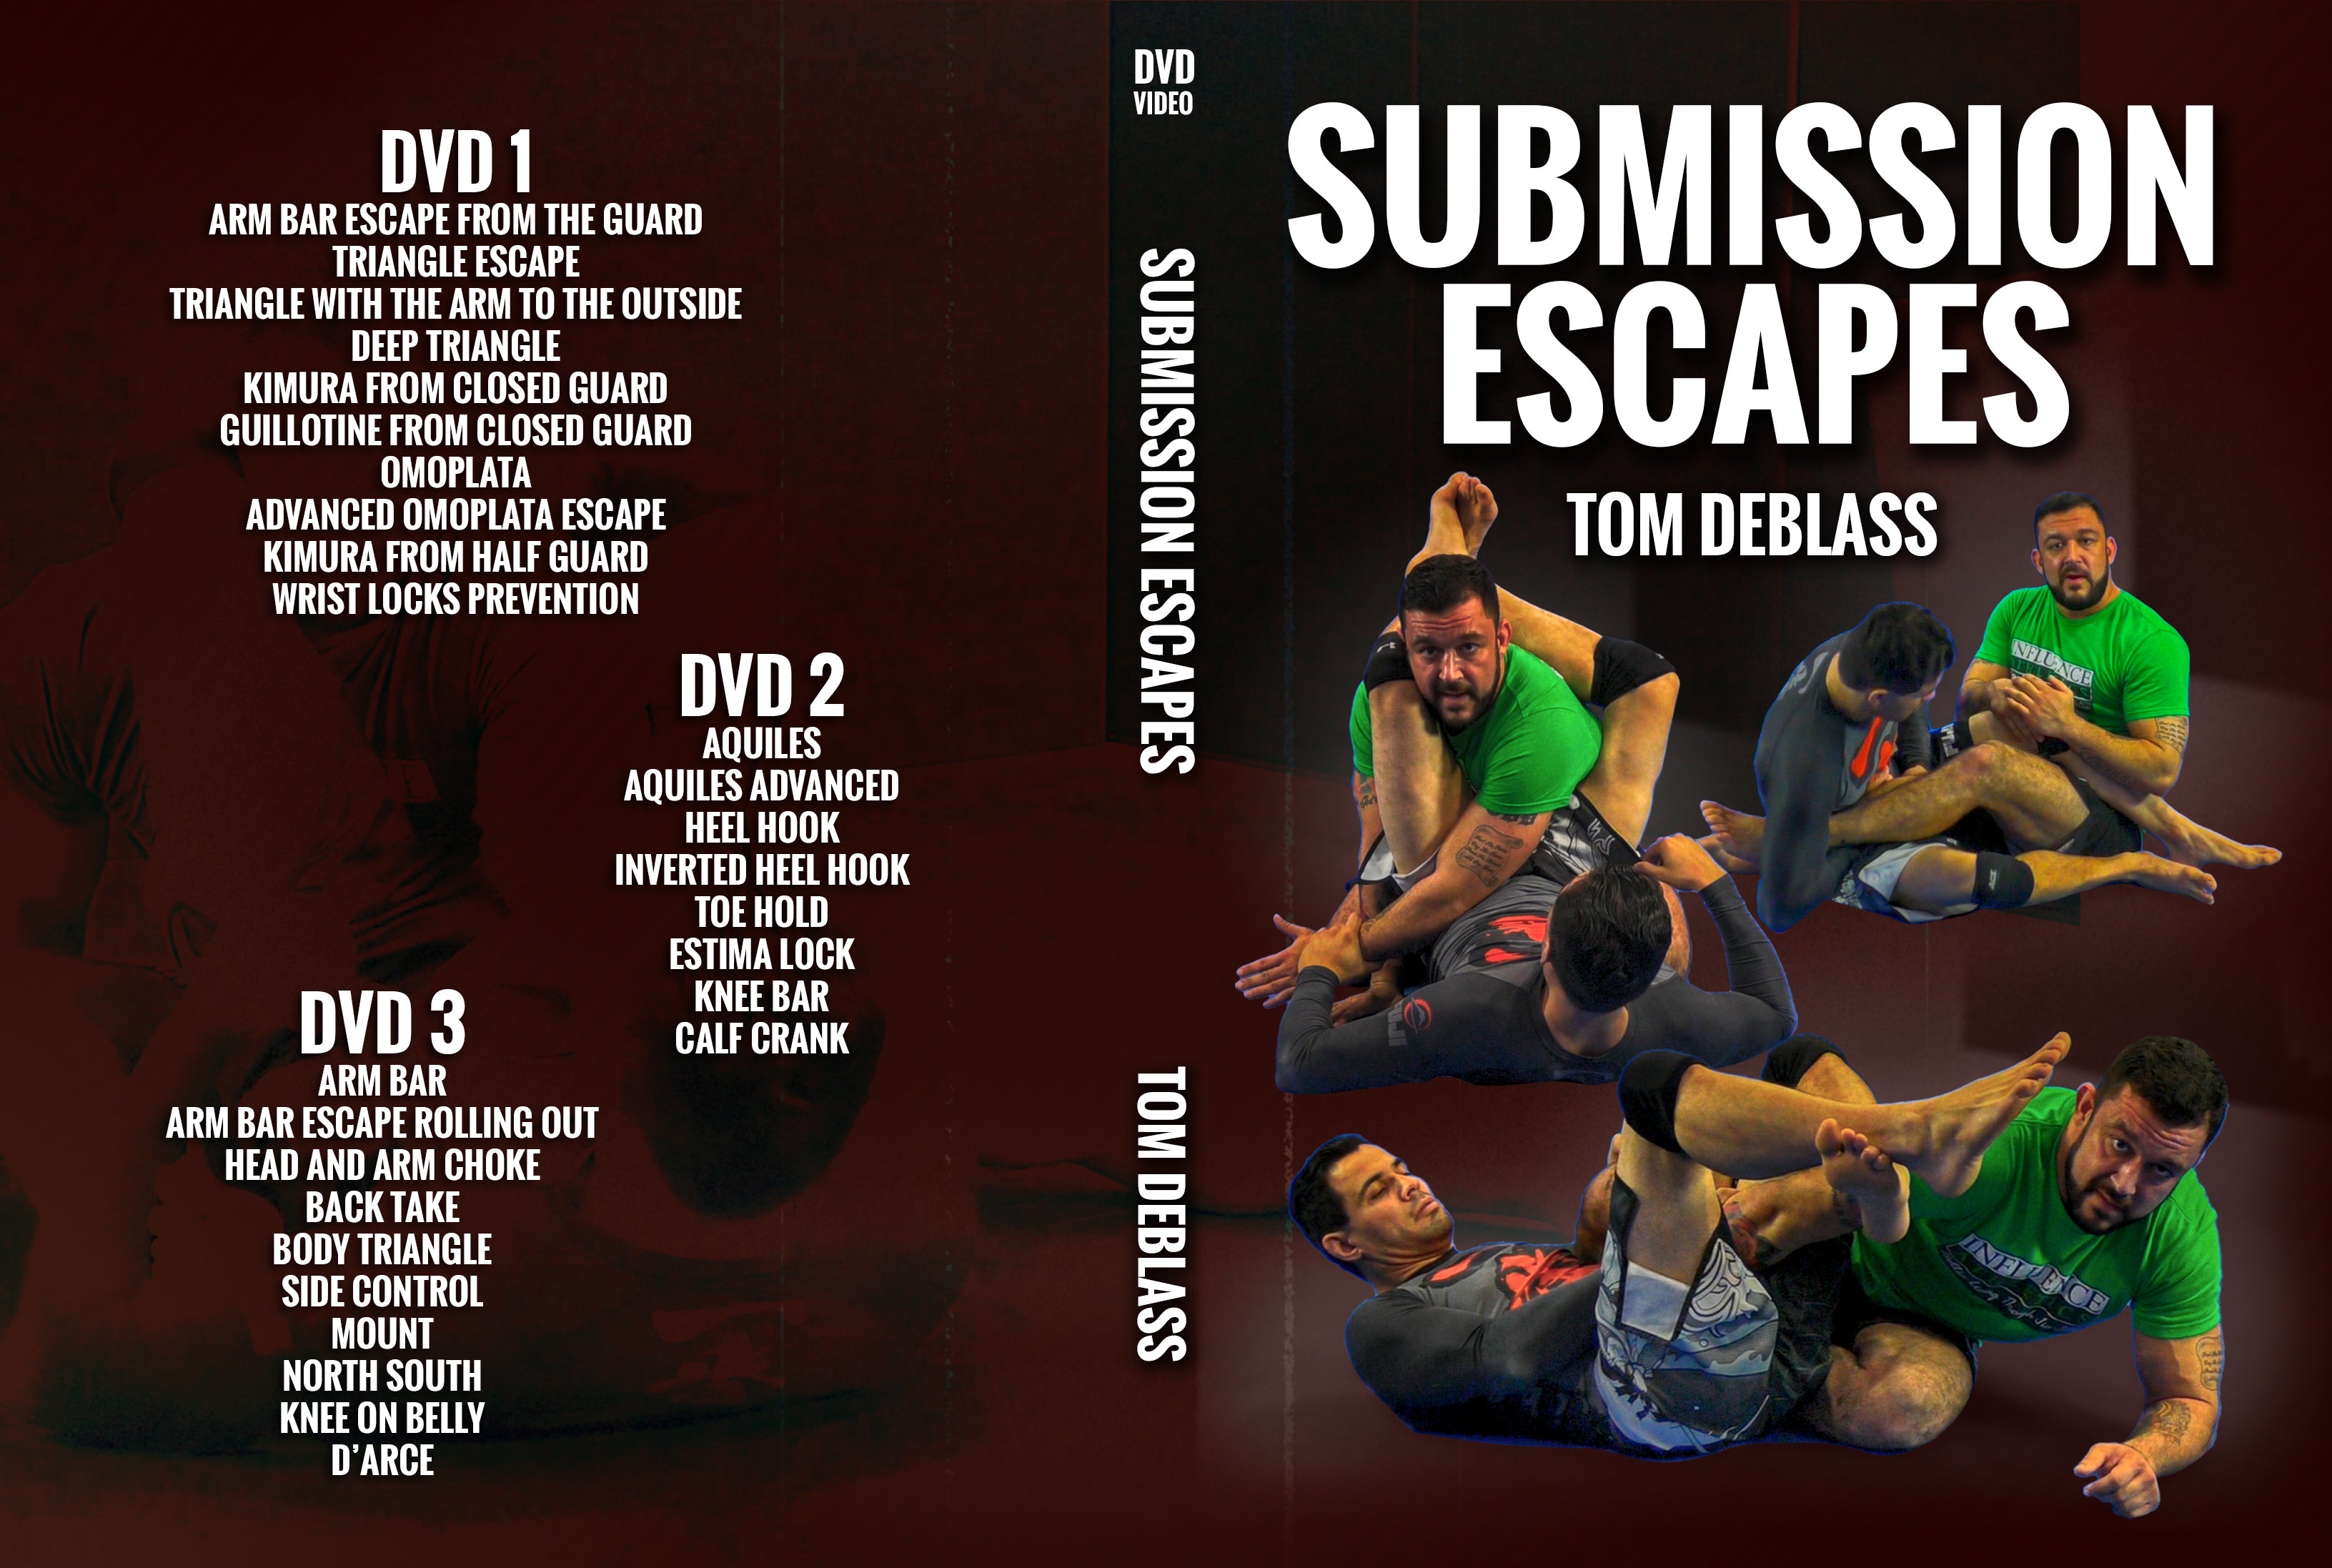 Submission Escapes By Tom DeBlass